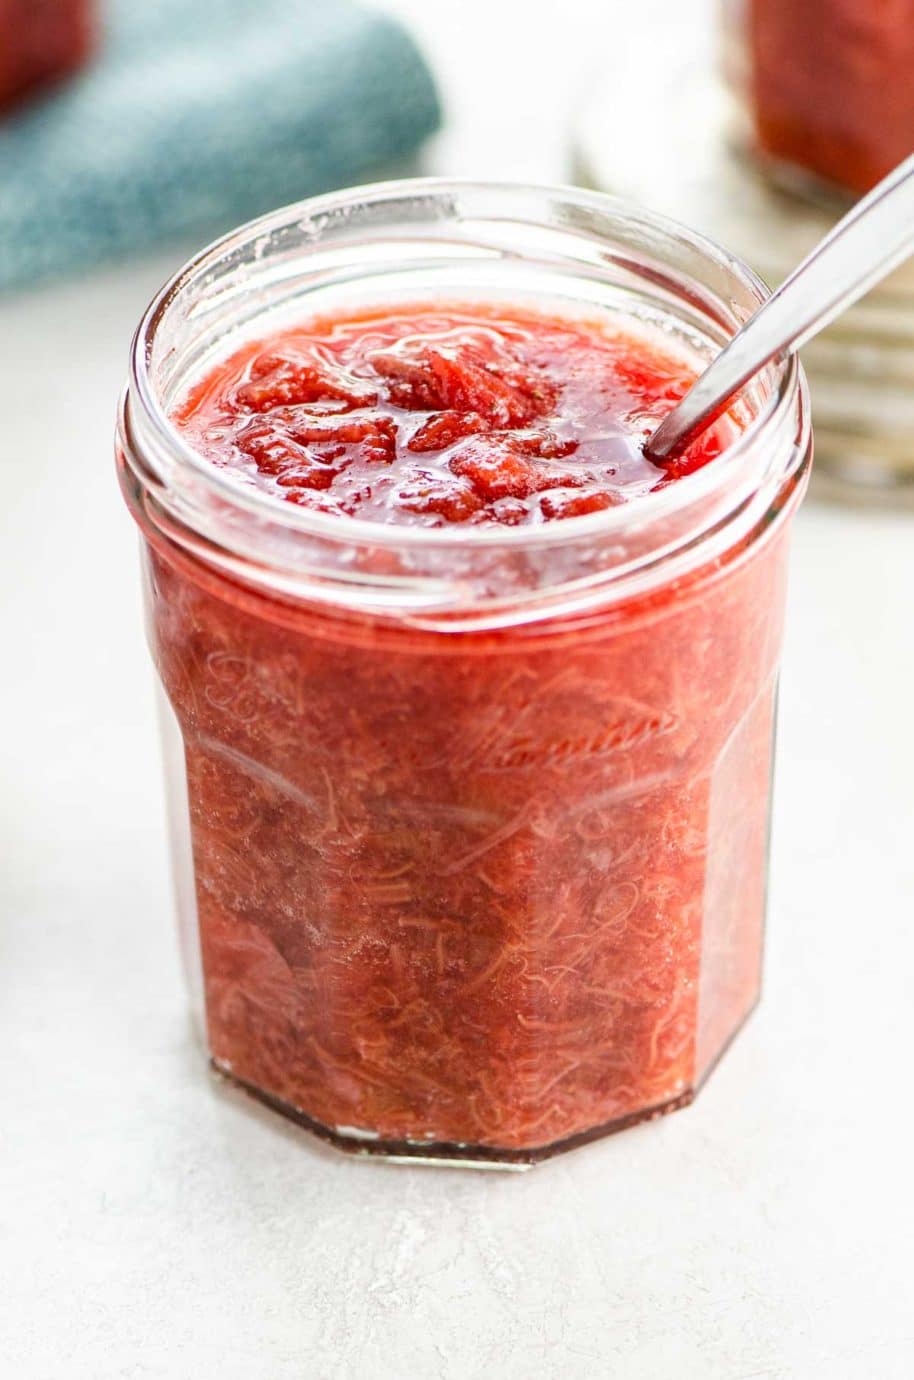 strawberry rhubarb sauce (compote) in a jam jar